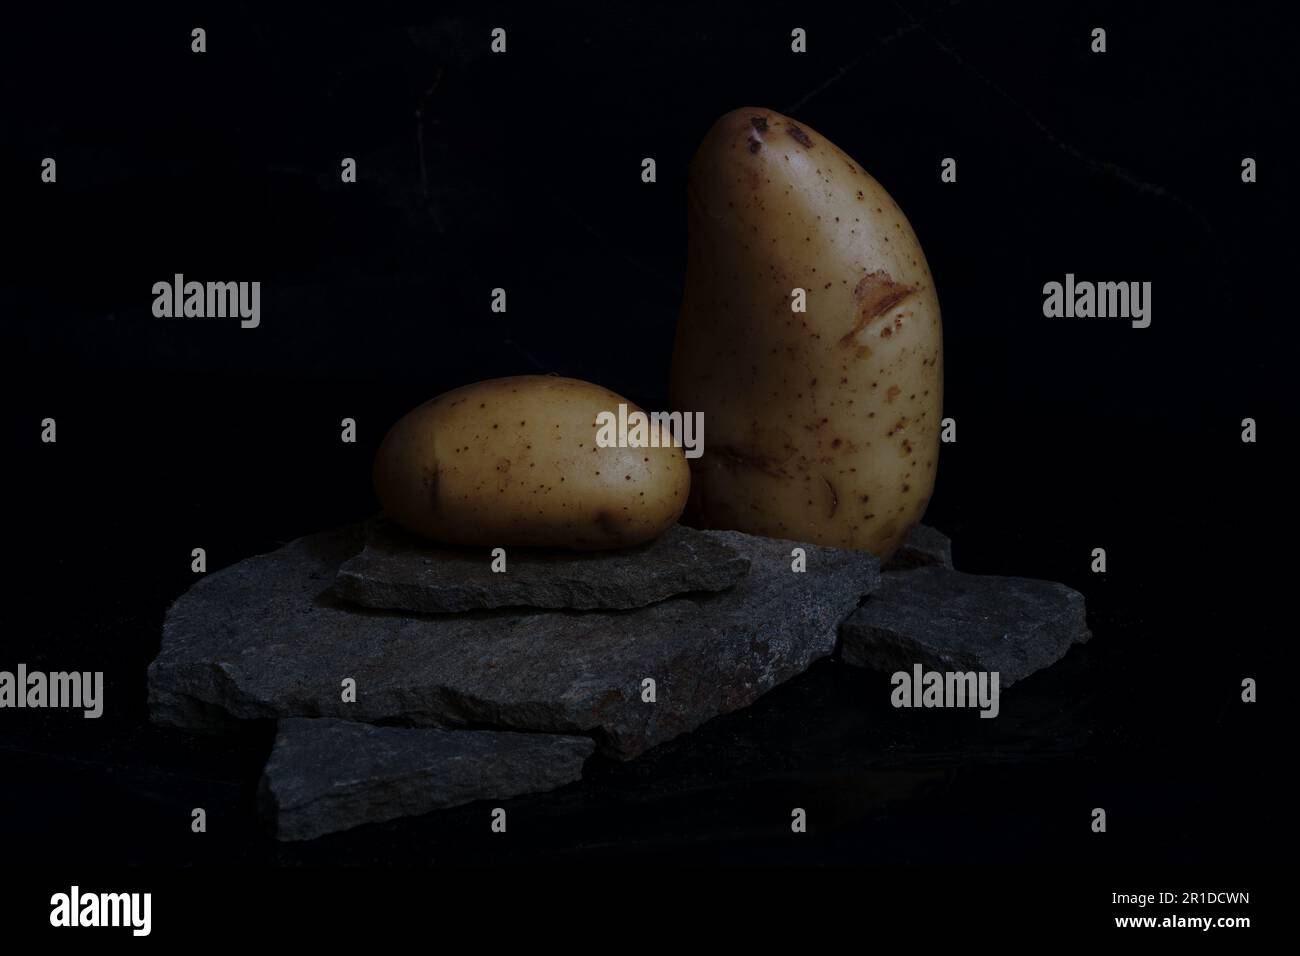 A still life with potatoes Stock Photo